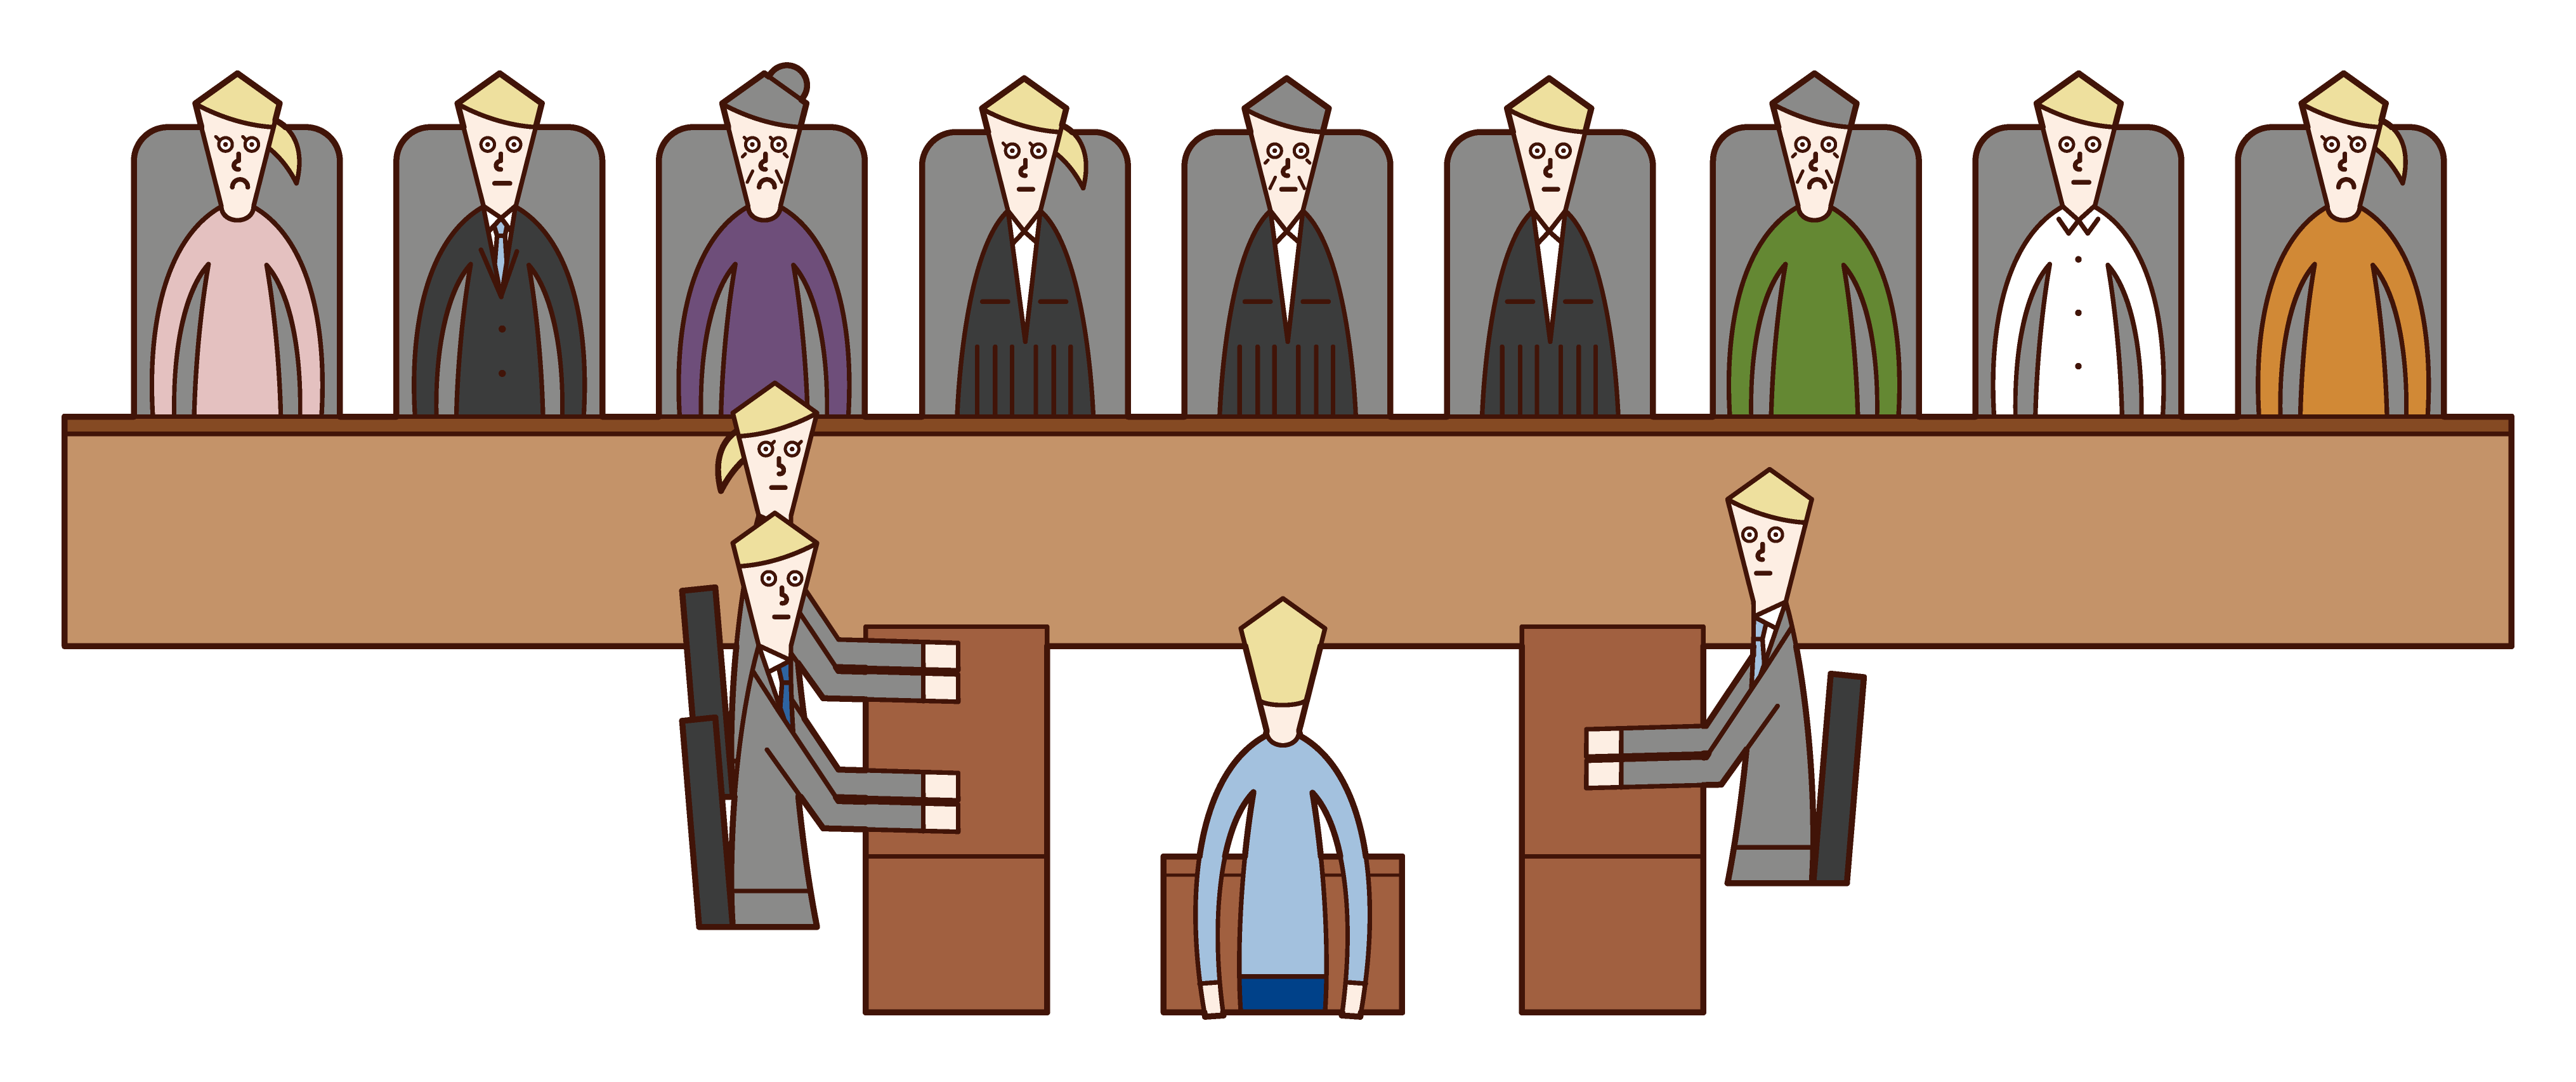 Illustration of the trial judge system